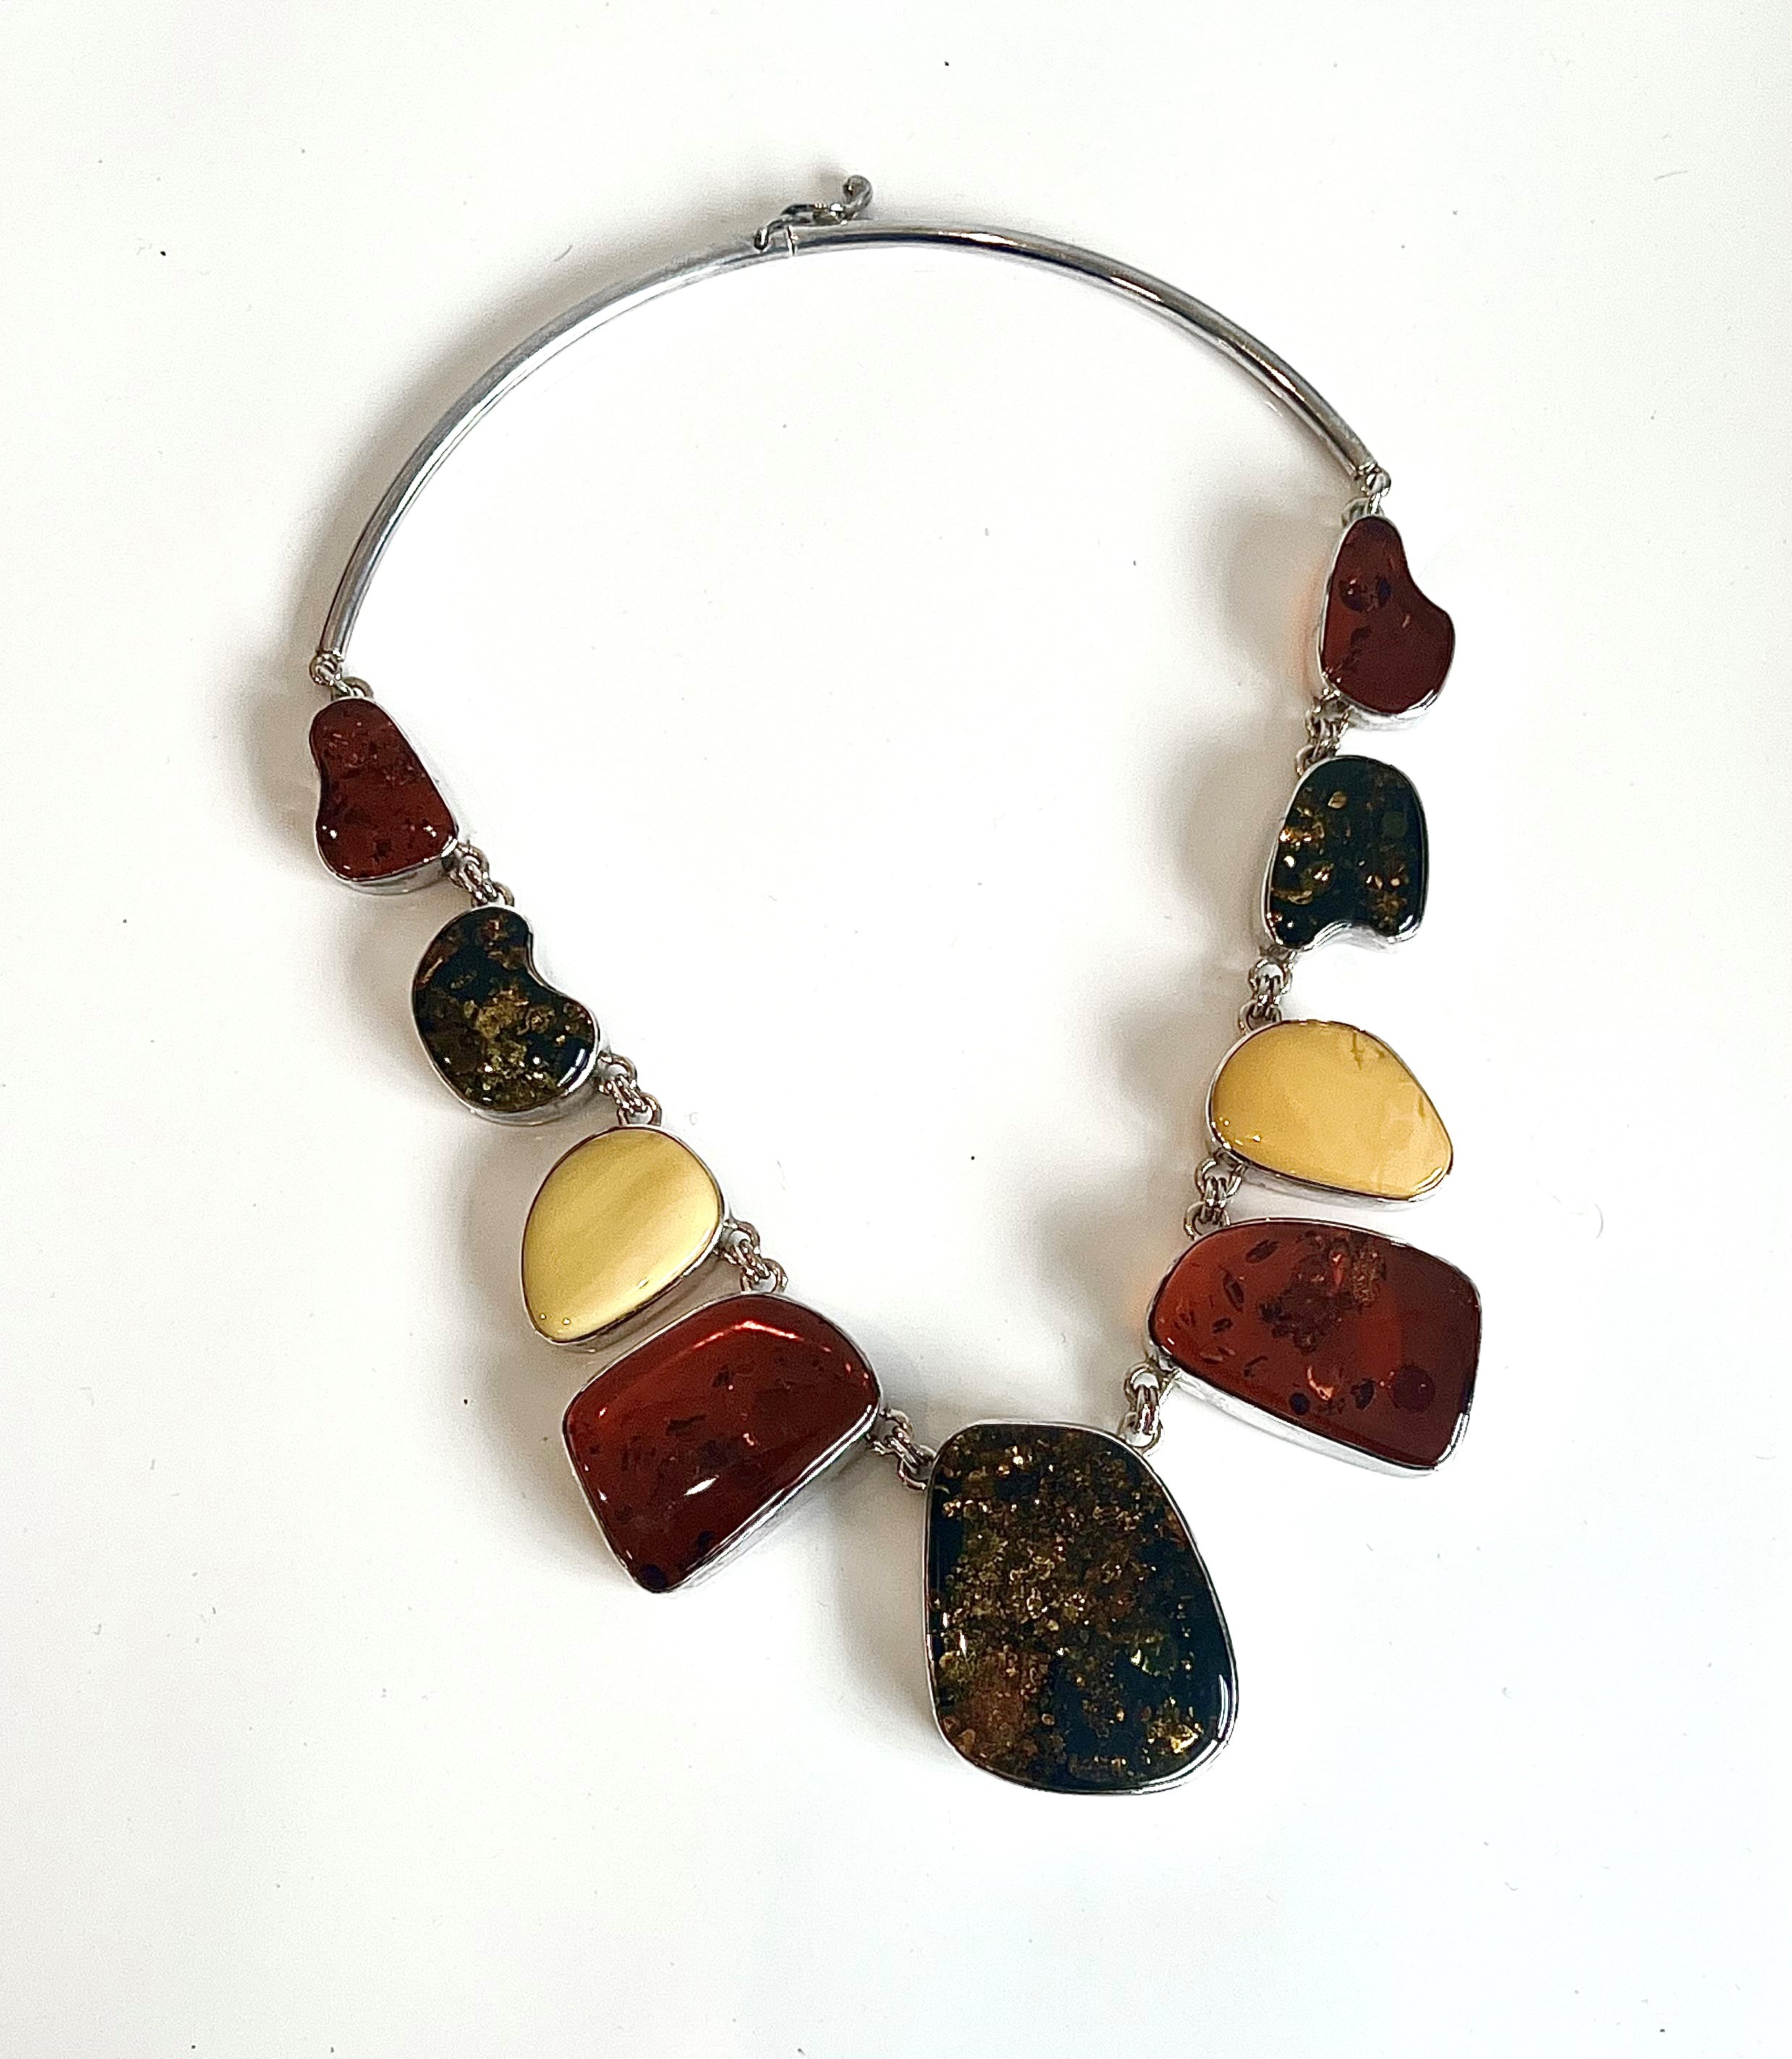 A silver and Baltic amber plaque necklace - with nine graduated asymmetric amber plaques, each rub-